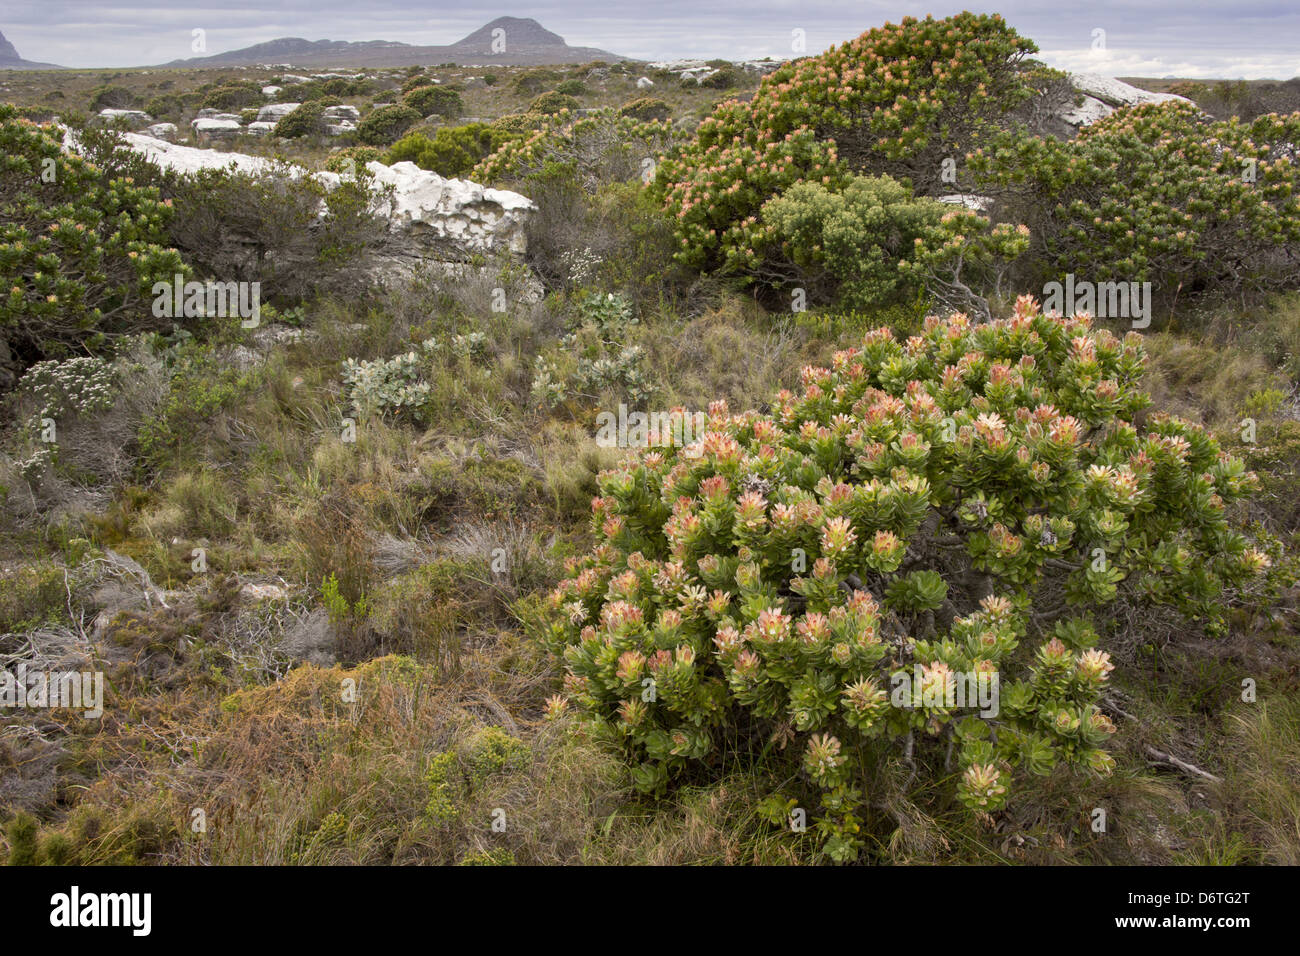 Common Pagoda Mimetes cucullatus flowering in fynbos habitat Table Mountain N.P. Western Cape Province South Africa August Stock Photo